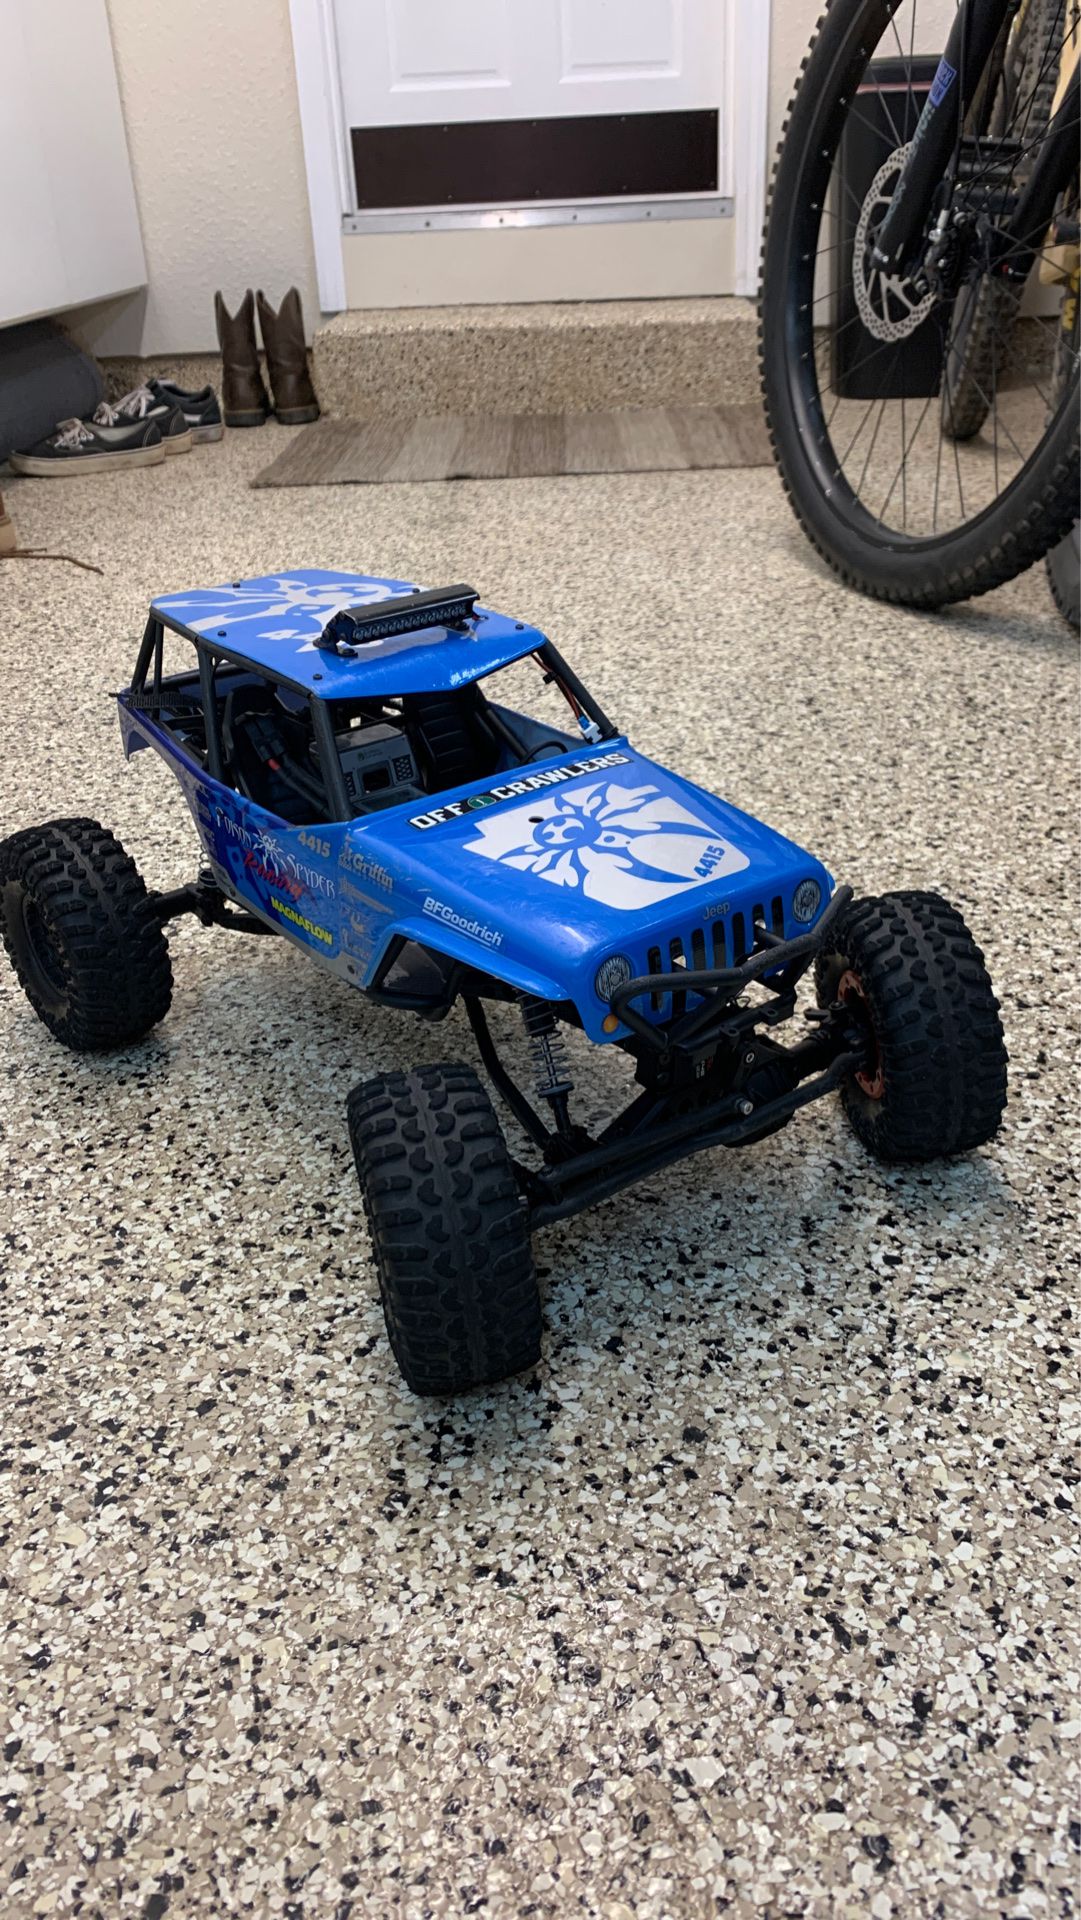 Axial poison spider rock racer